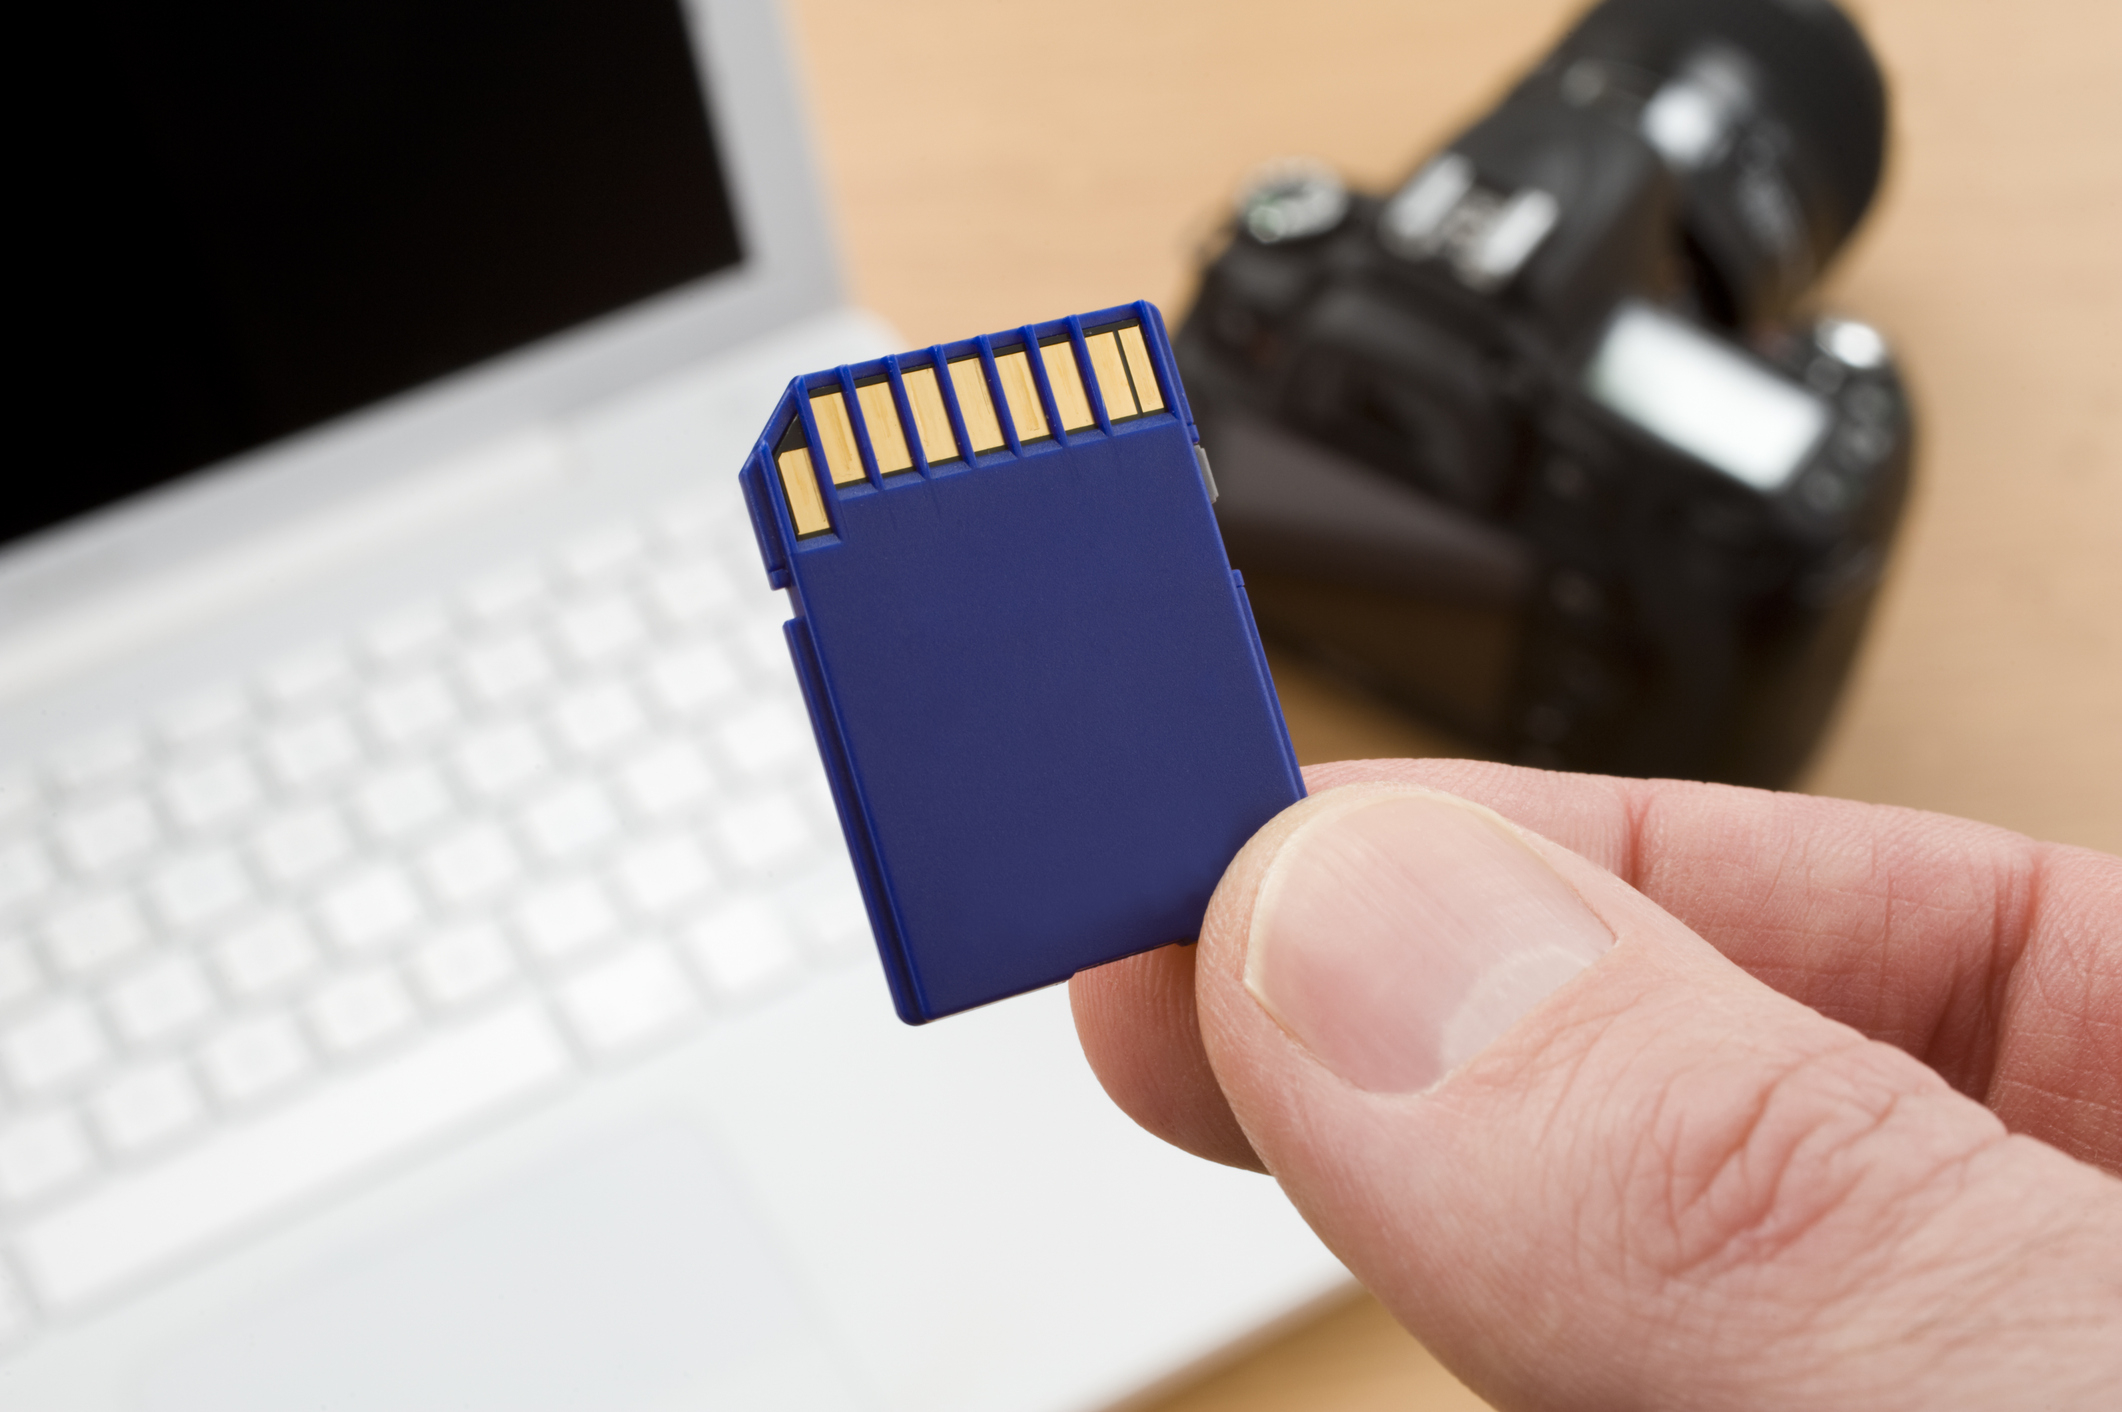 A close-up of a hand holding an SD card in front of a partially visible laptop and a blurred camera in the background